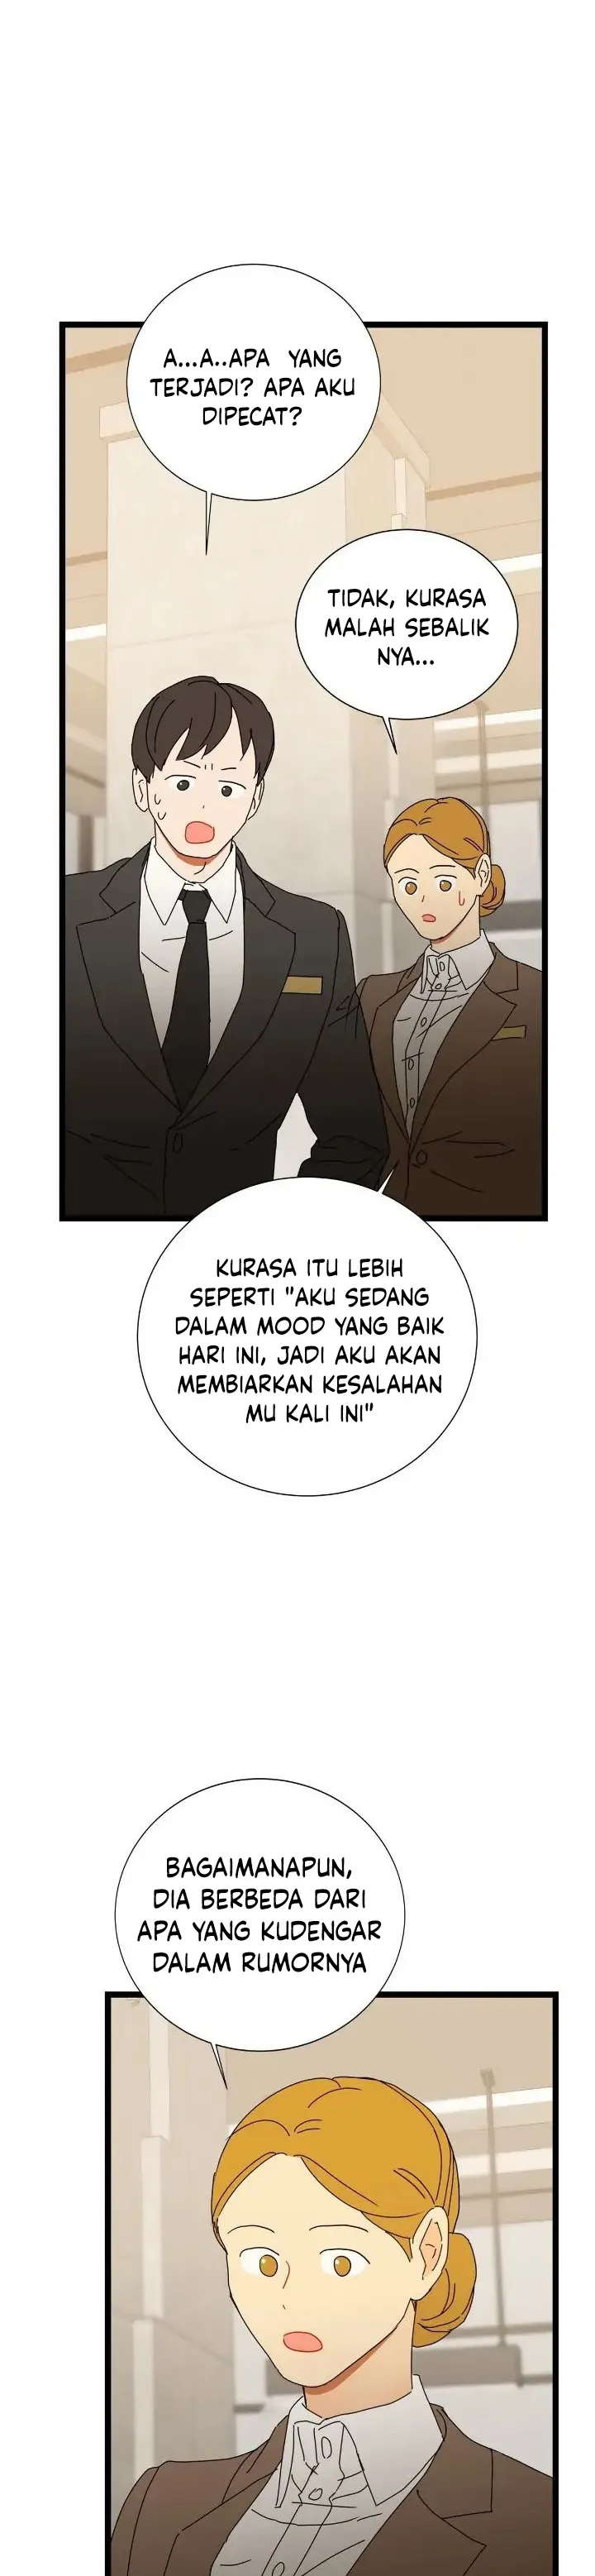 King In The City Chapter 107 - Epilog 2 - 187